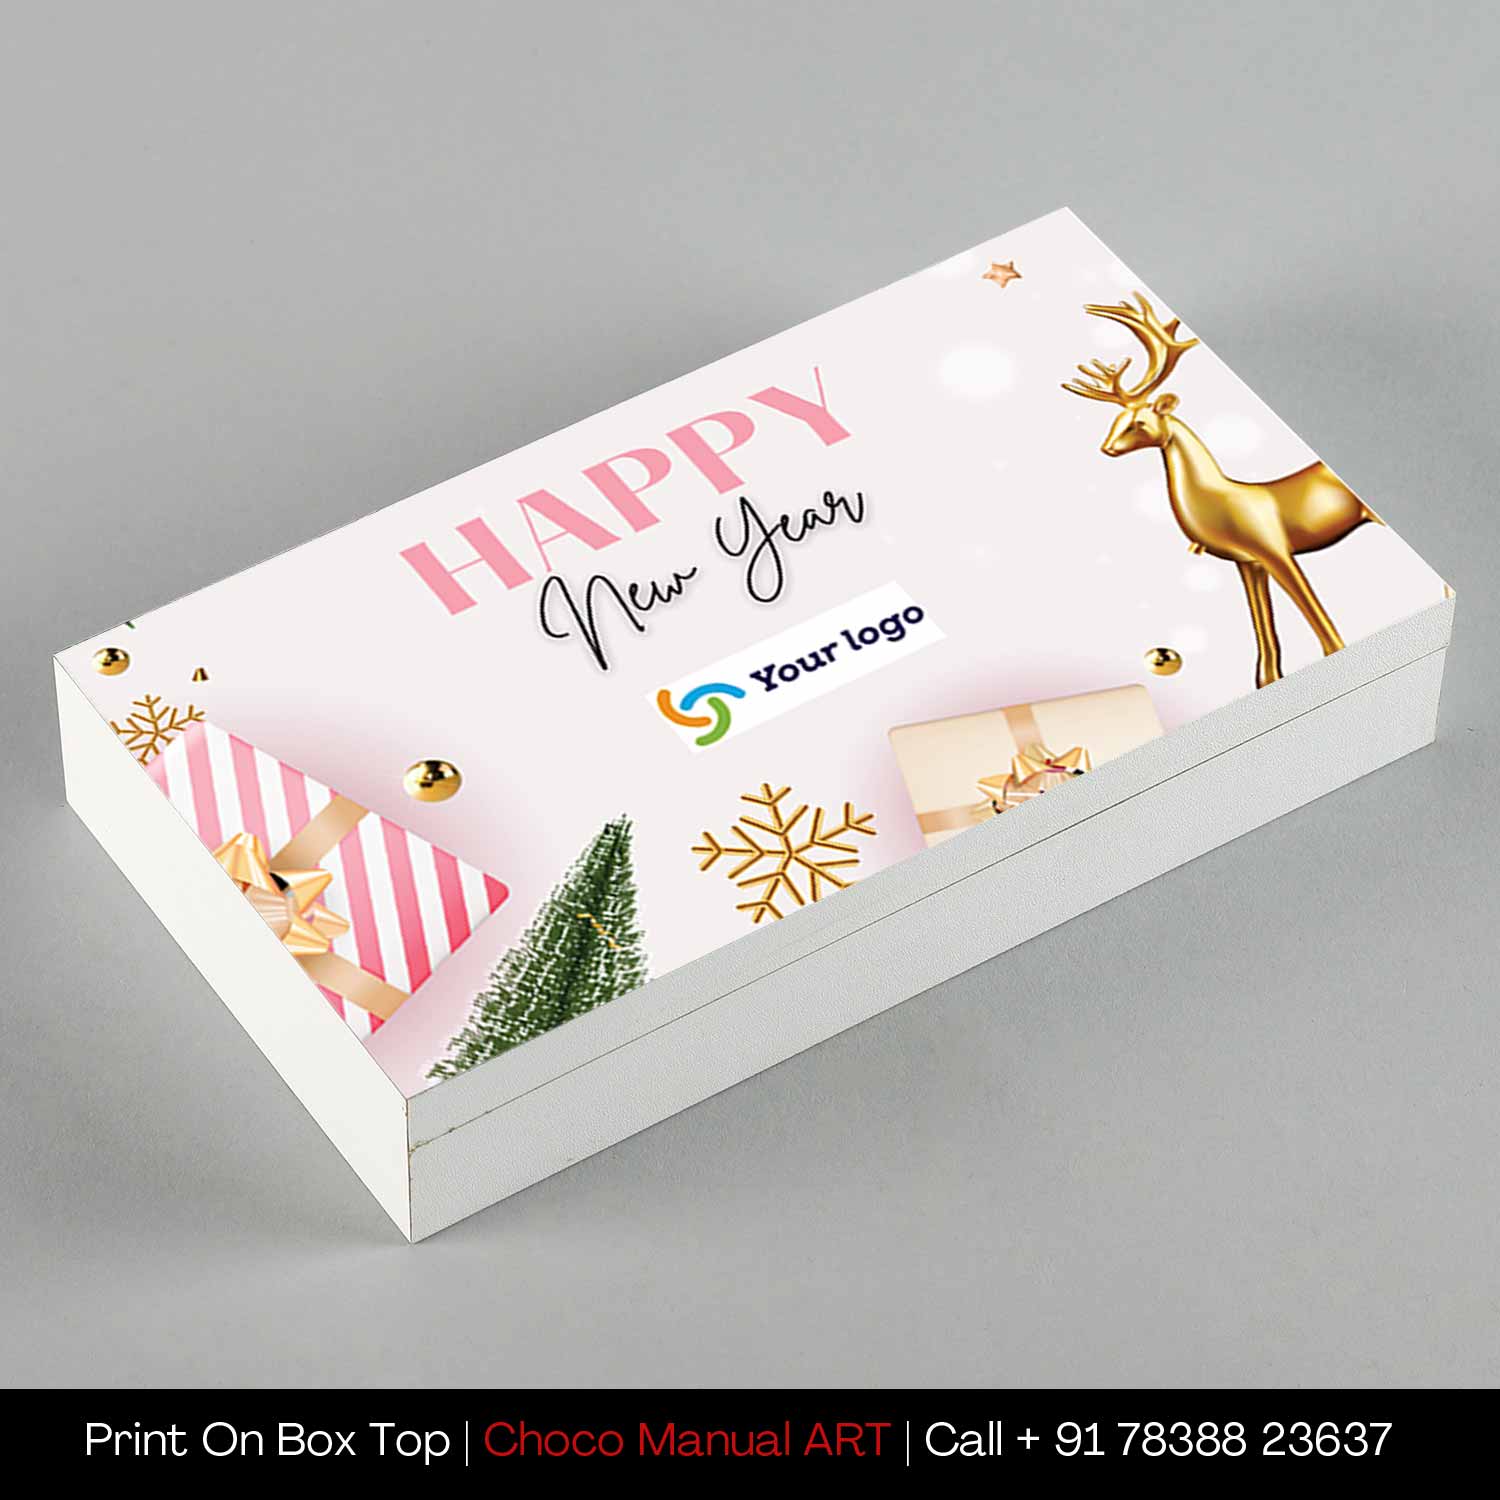 Send New Year Chocolate Gifts to India